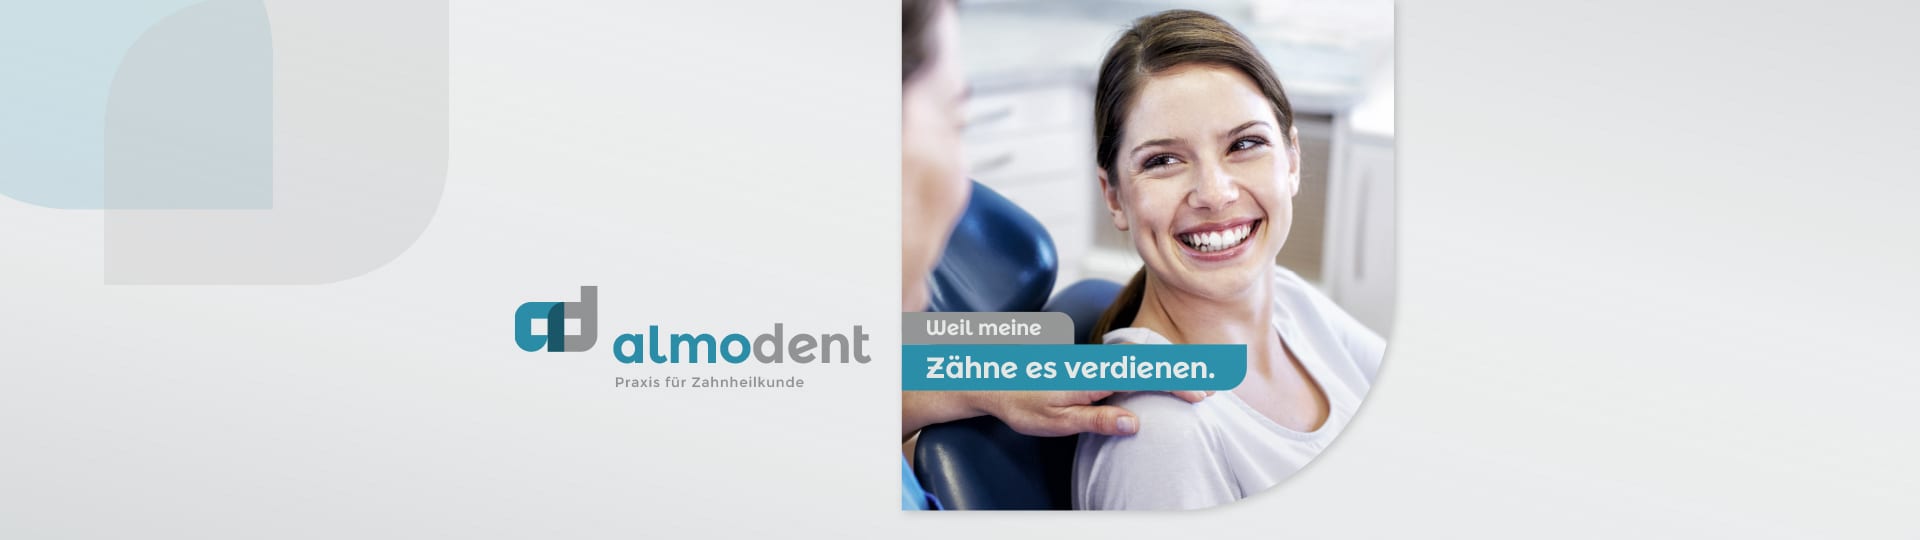 Almodent